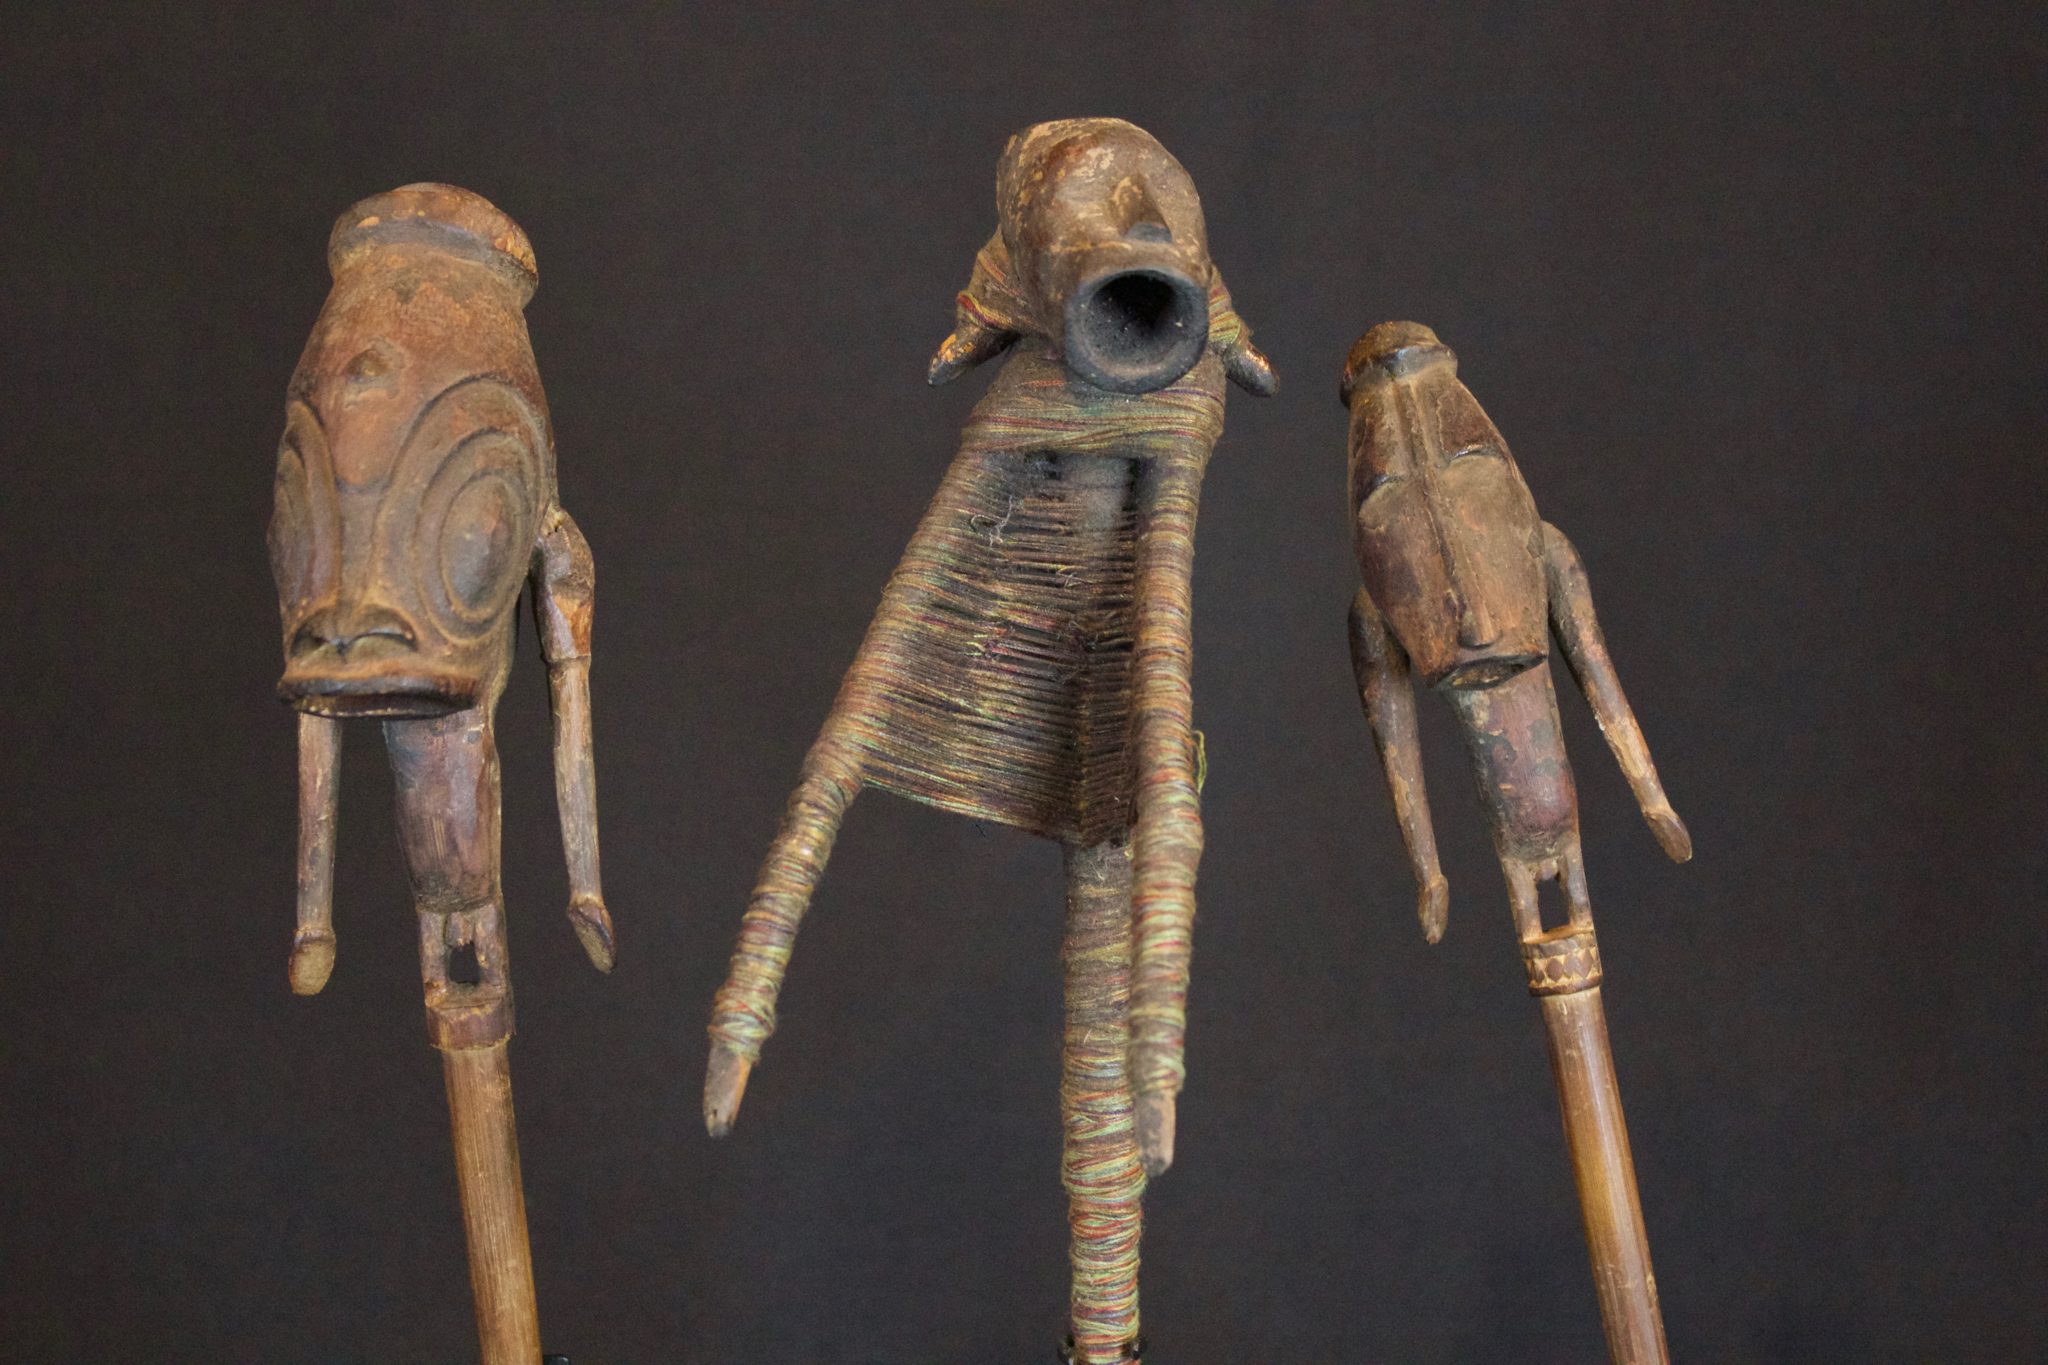 Shaman Talisman Figure, Papúa New Guinea, Indonesia, Early 20th c, Wood. Used in ritual ceremonies to stop rain. (Figure on right - 12 ½” x 2” x 2 ½”, Sold)